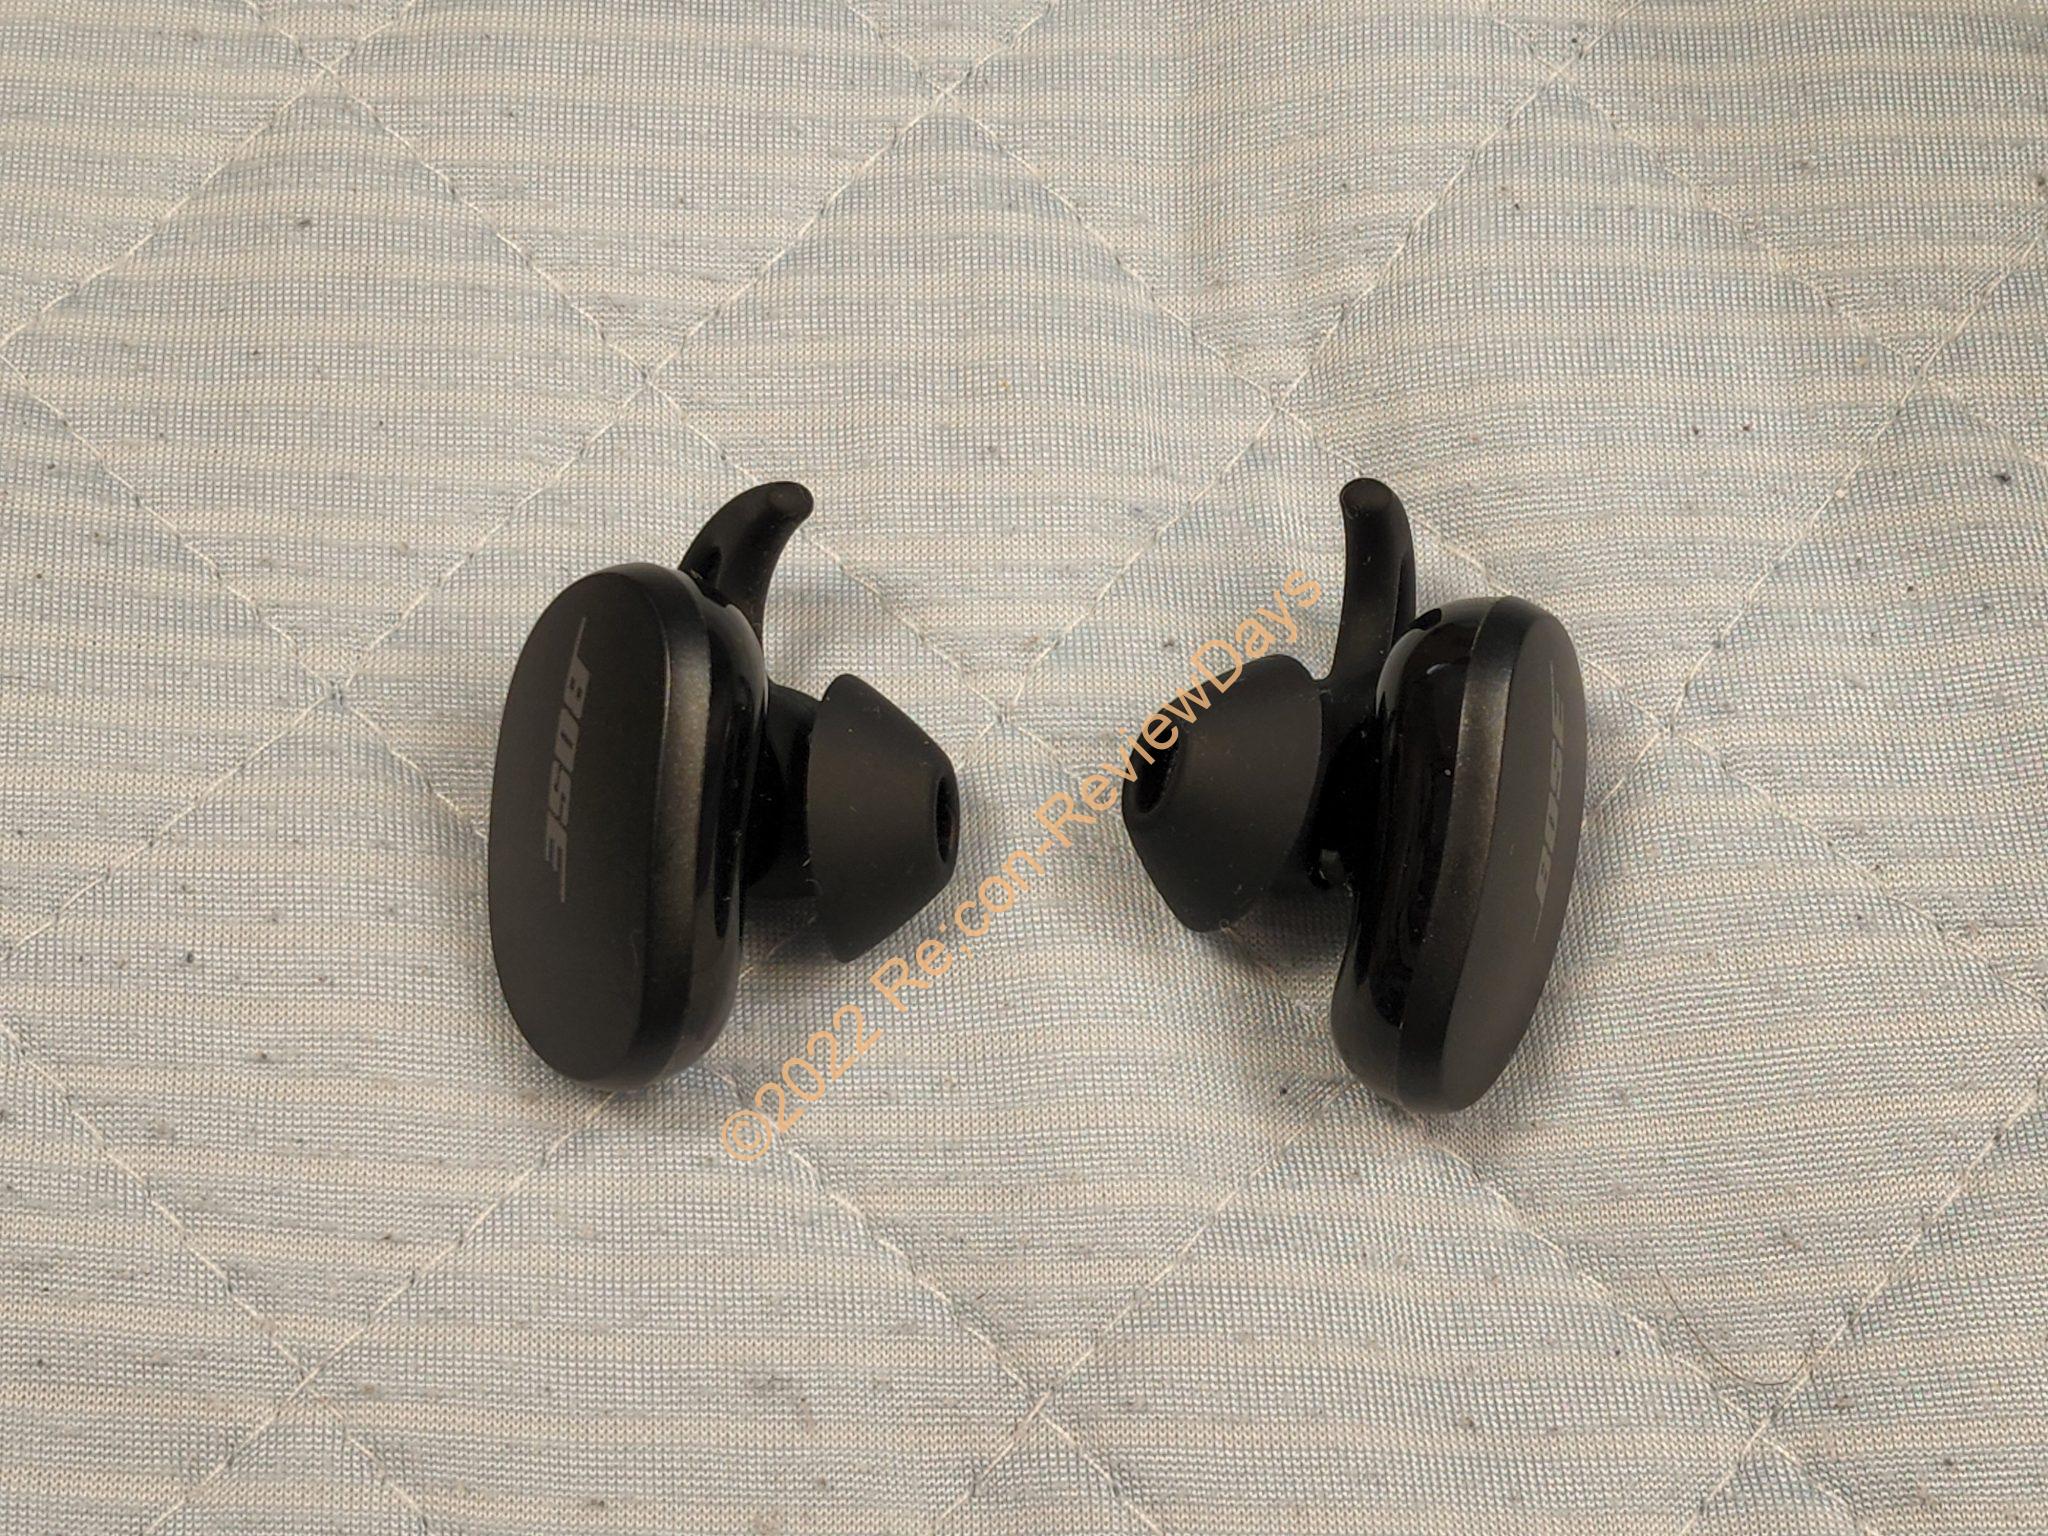 BOSE QuietComfort Earbudsの充電ケースを失くしてしまいました